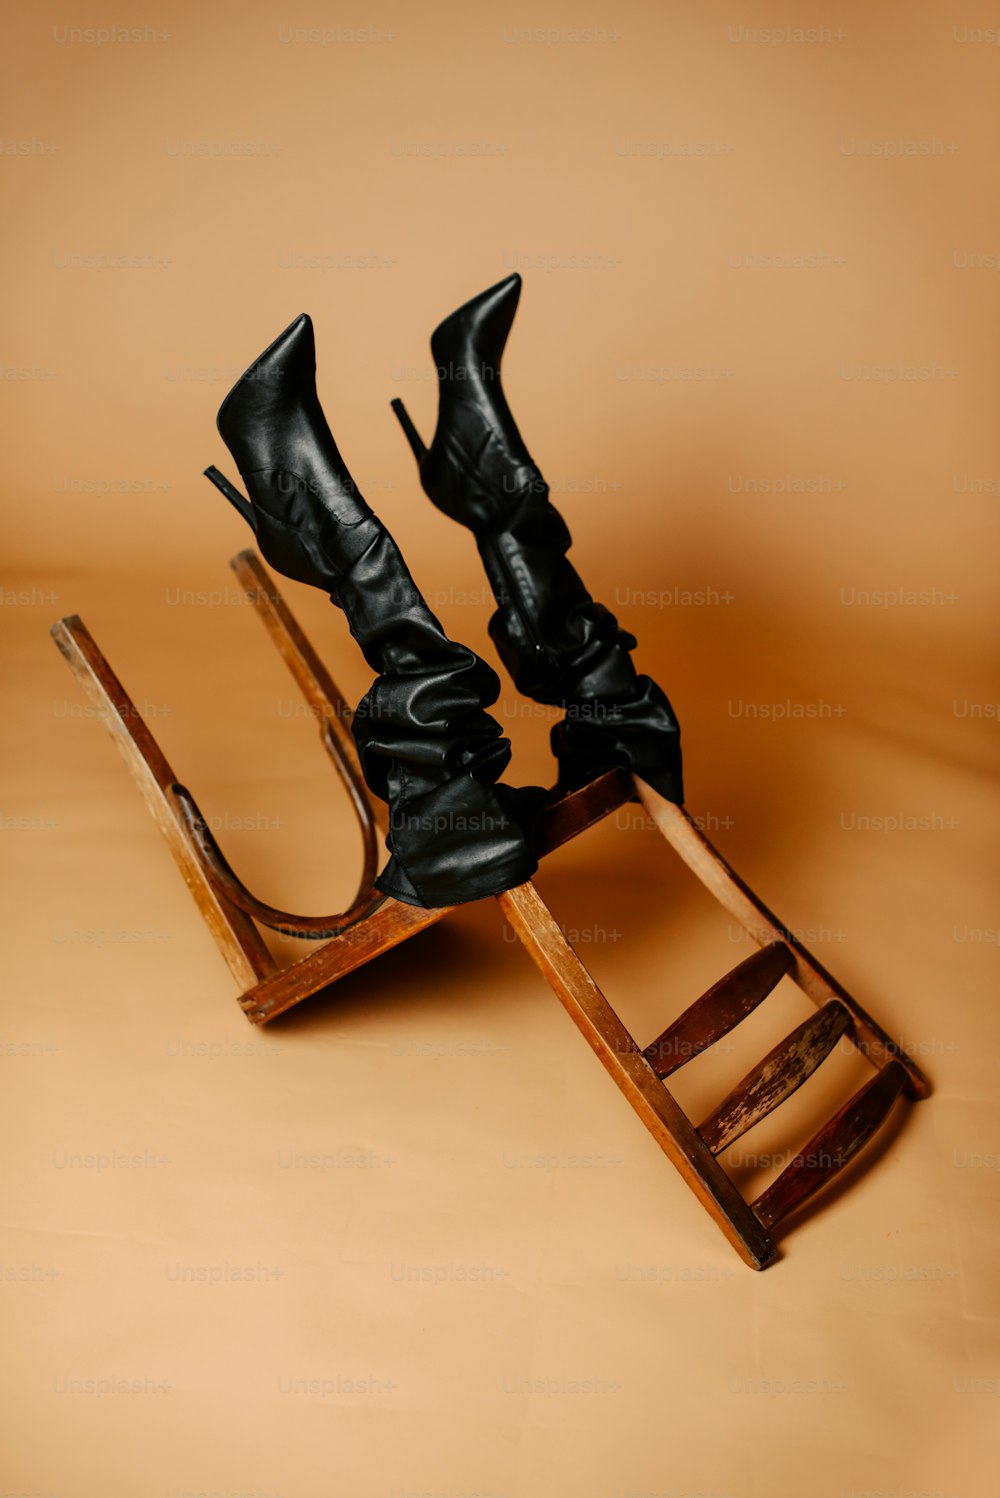 a pair of black high heeled shoes sitting on top of a wooden sled